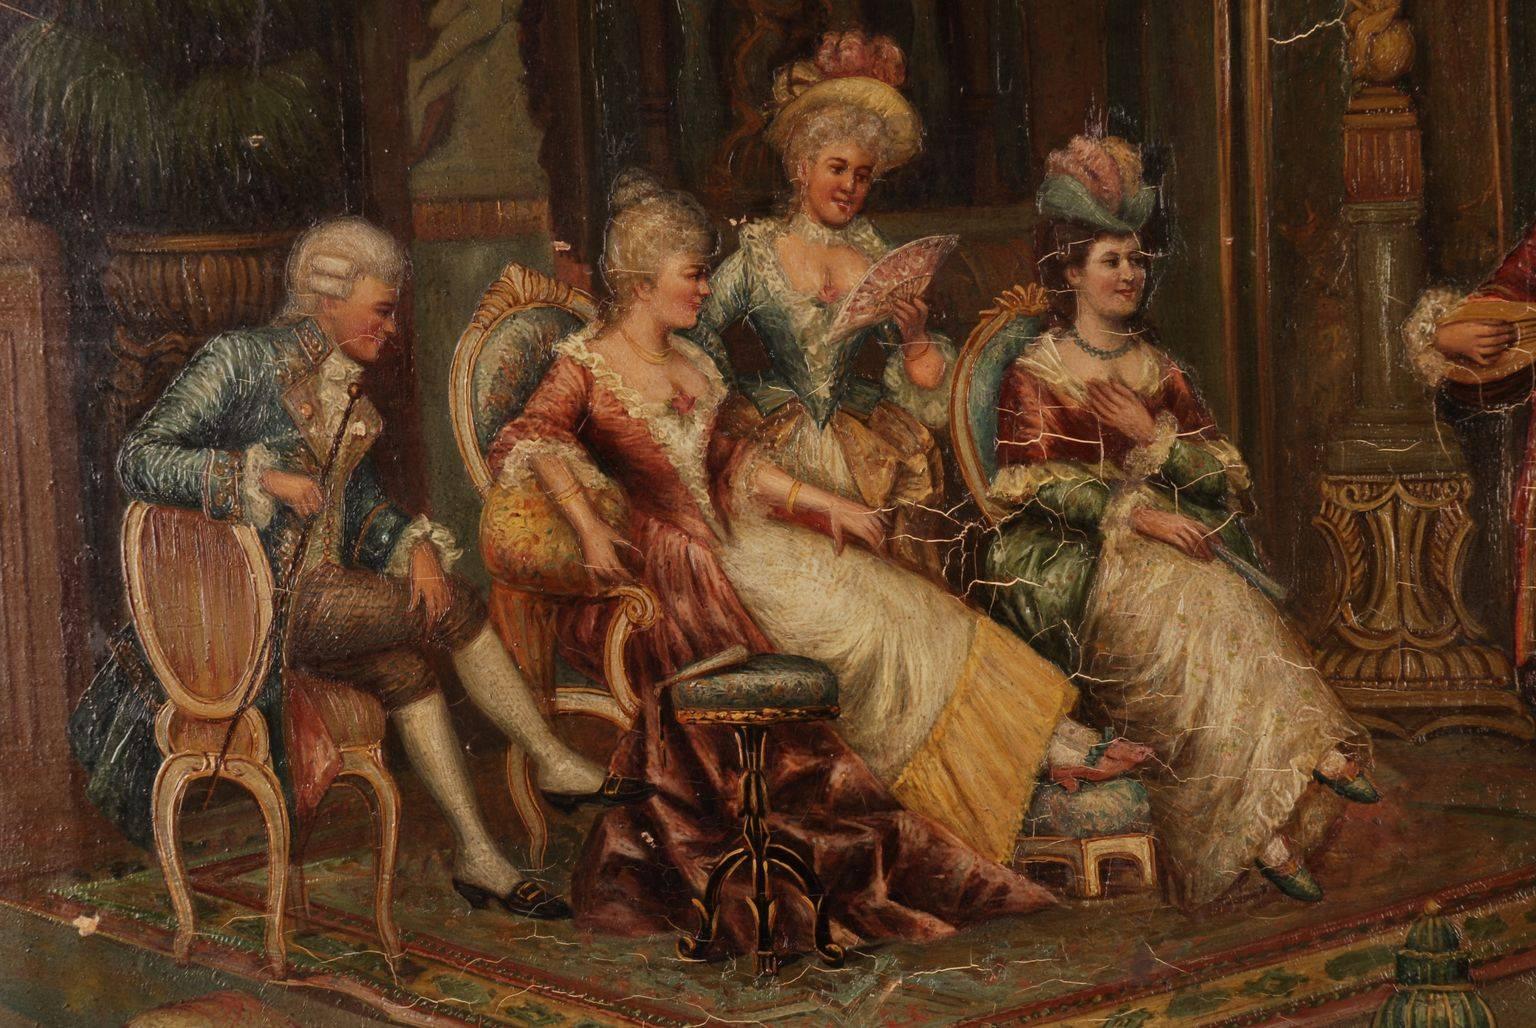 Oil painting of a rococo scene 19th century F. Heinz.
Oil on mahogany plate. Scene of a rococo group of people. Return with Inventory number. Unrestored historical condition. Gold frame. Signed F. Heinz

Measures in cm:
with frame
Height 53